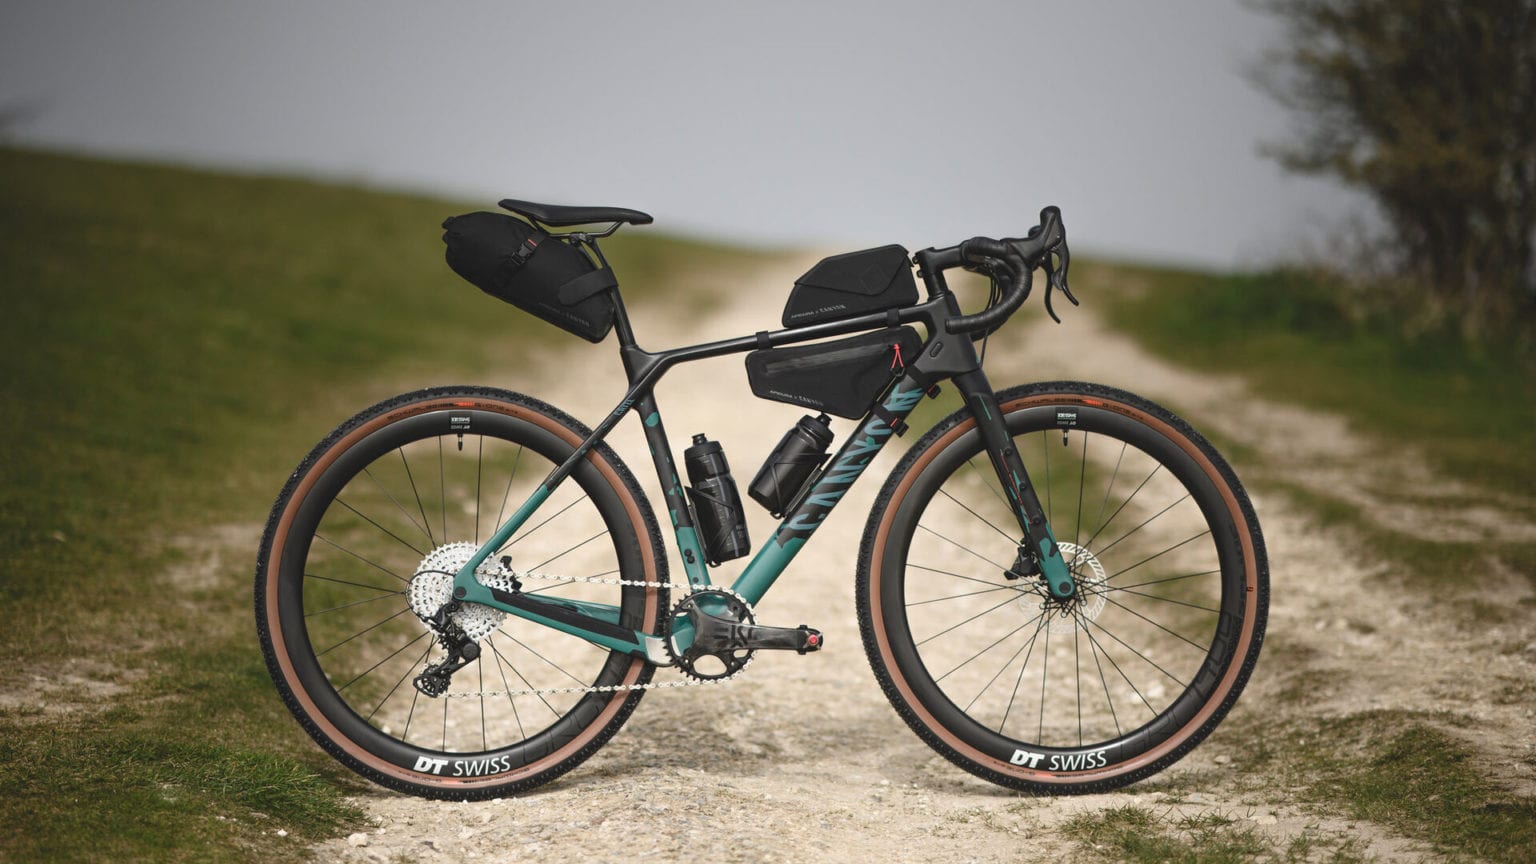 The new Canyon Grizl gravel bike is designed for rougher roads ...